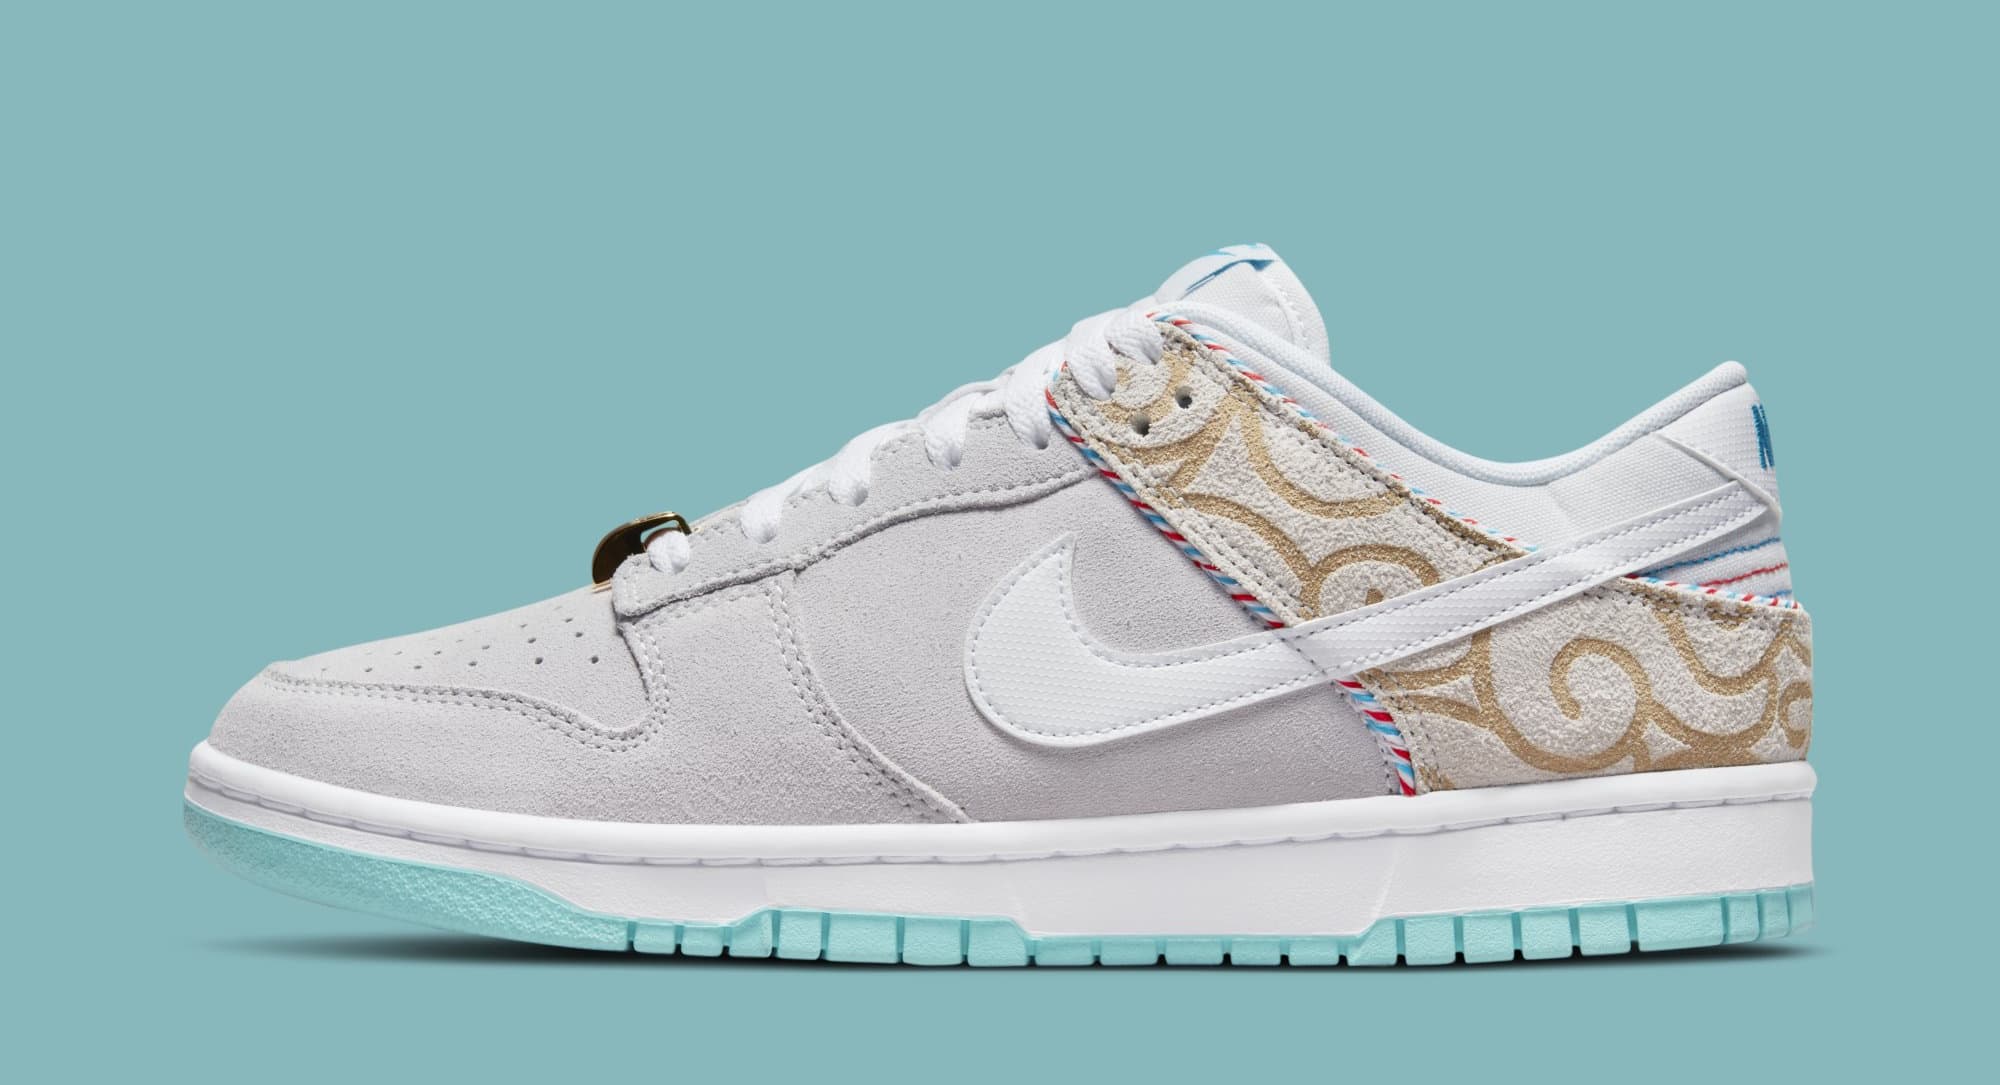 Nike Dunk Low 'Barbershop' Grey DH7614-500 (Lateral)